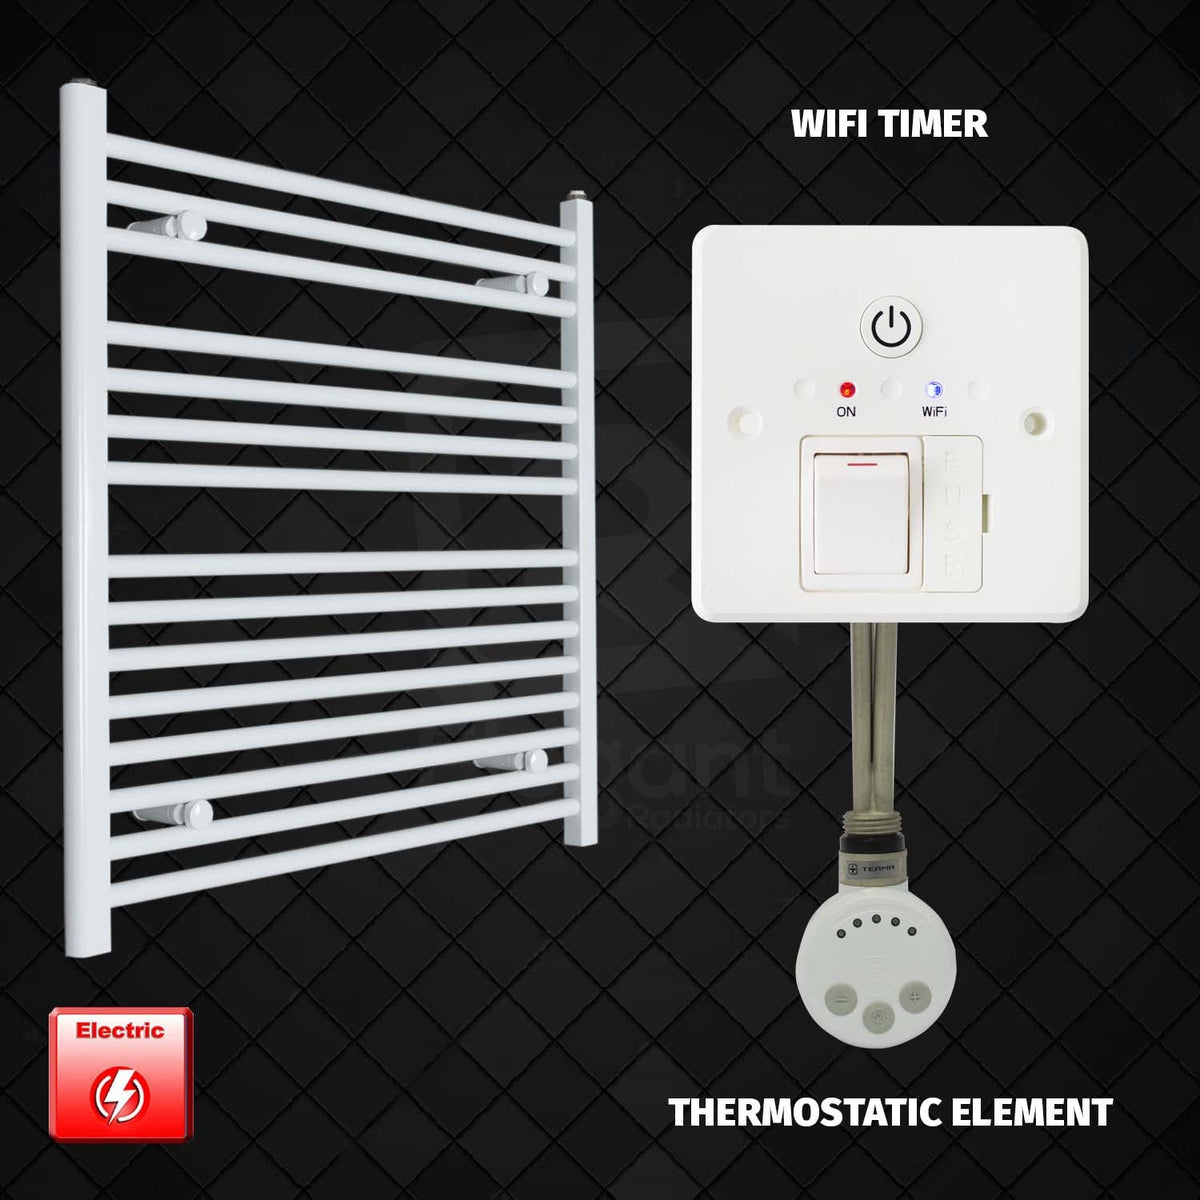 800 mm High 750 mm Wide Pre-Filled Electric Heated Towel Rail Radiator White HTR MOA Thermostatic element Wifi timer